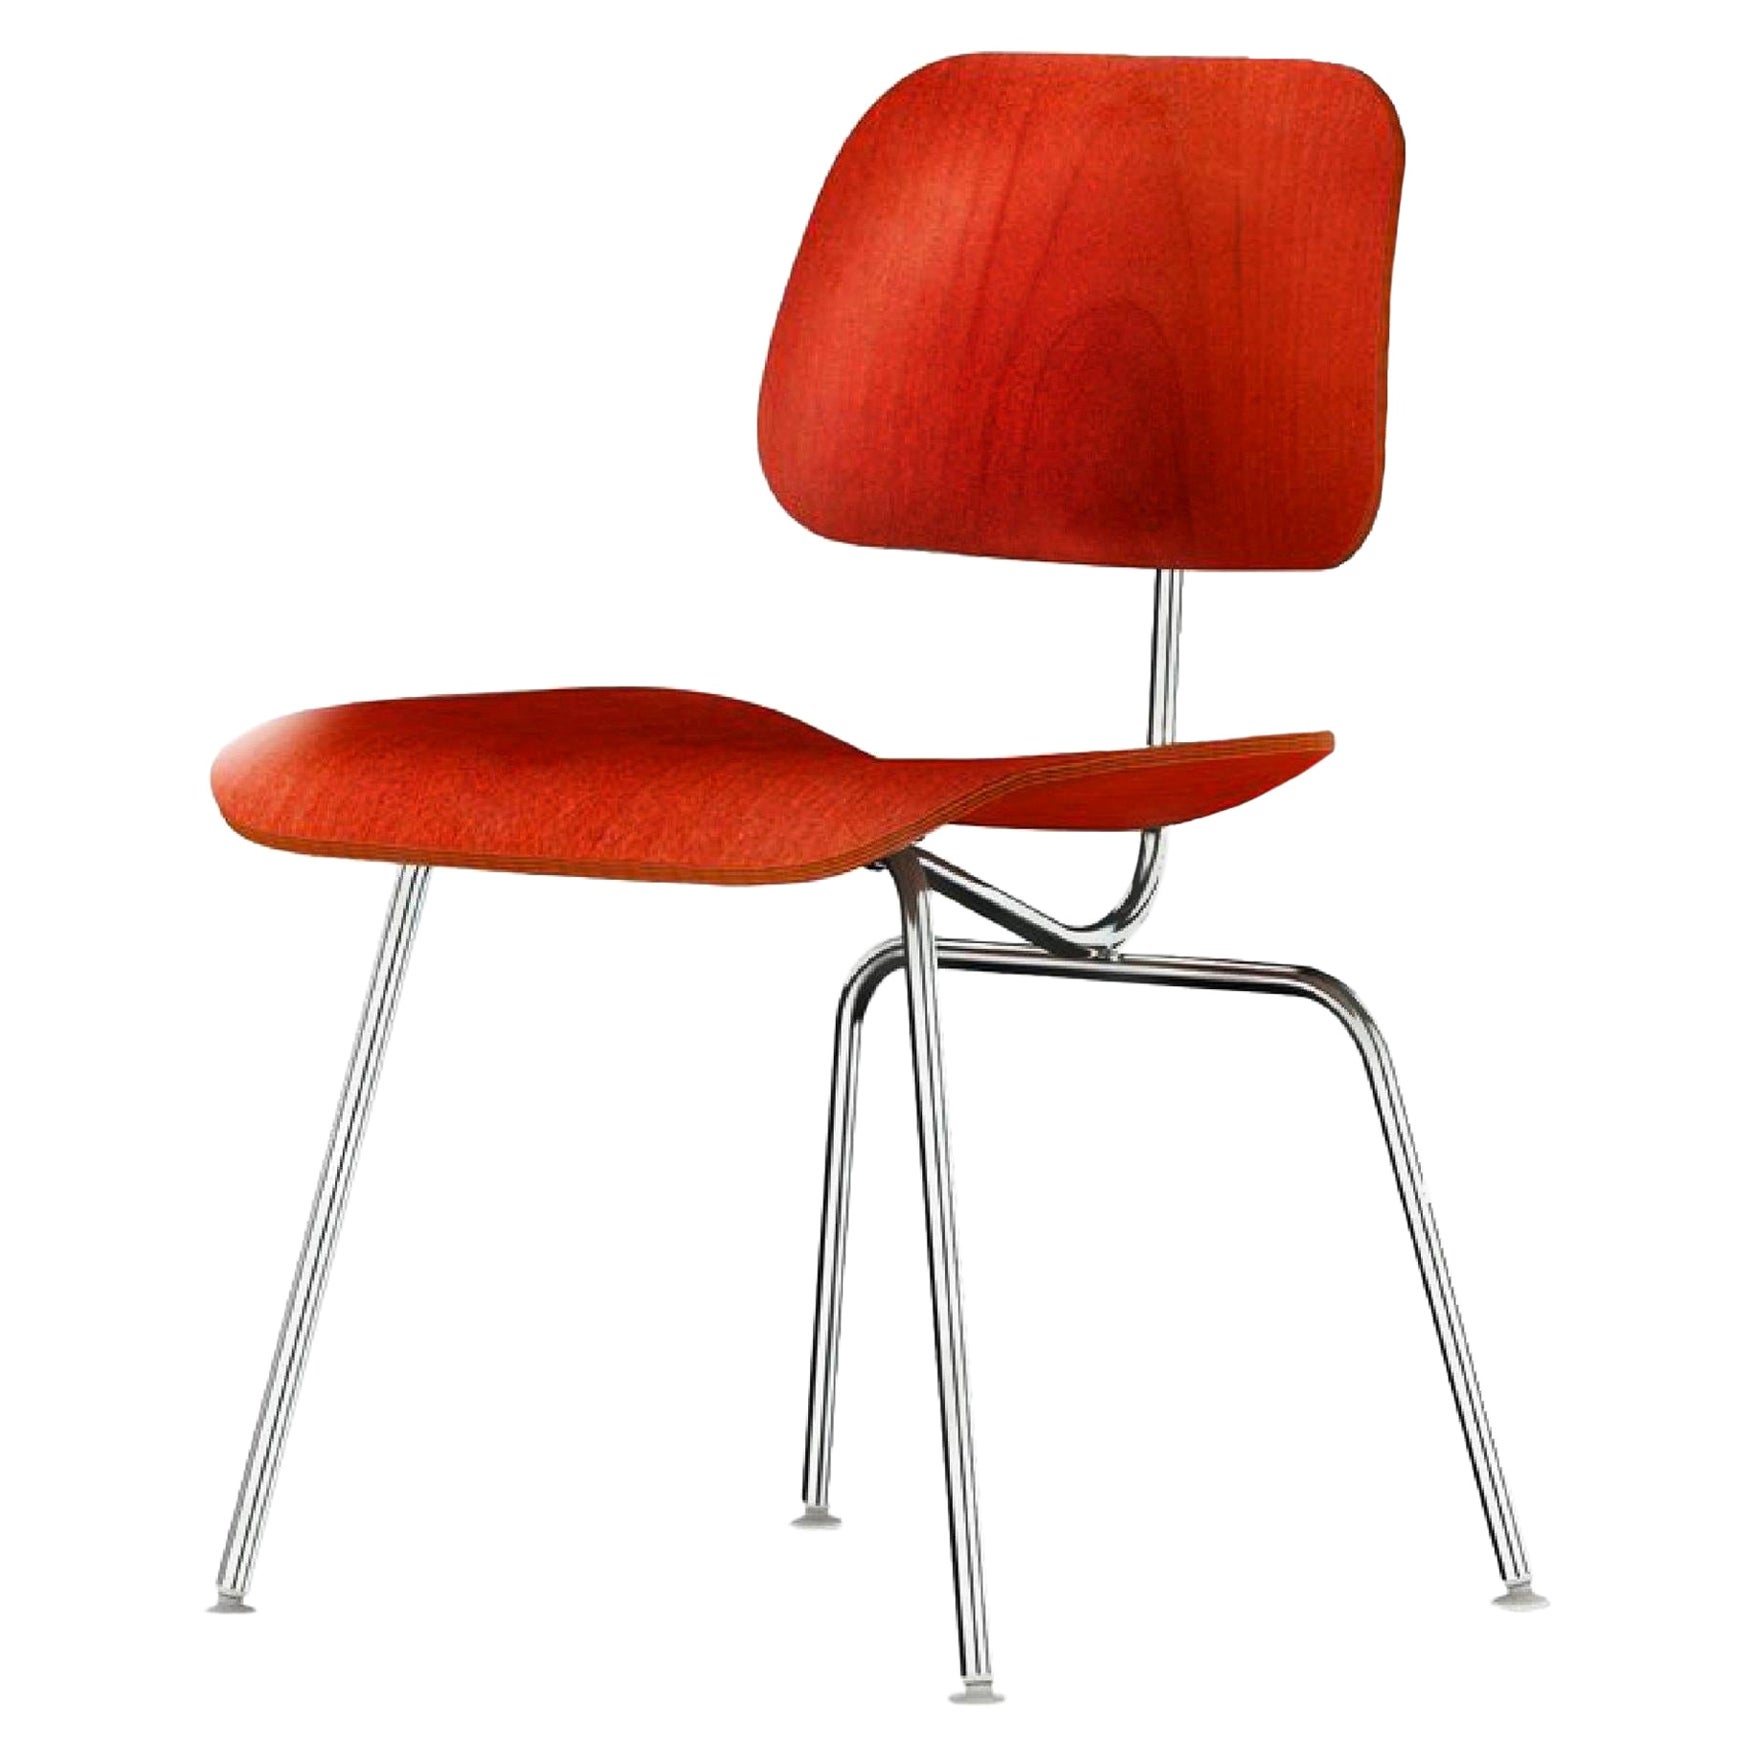 Pair of Charles and Ray Eames Red Beech DCM Chair, Herman Miller